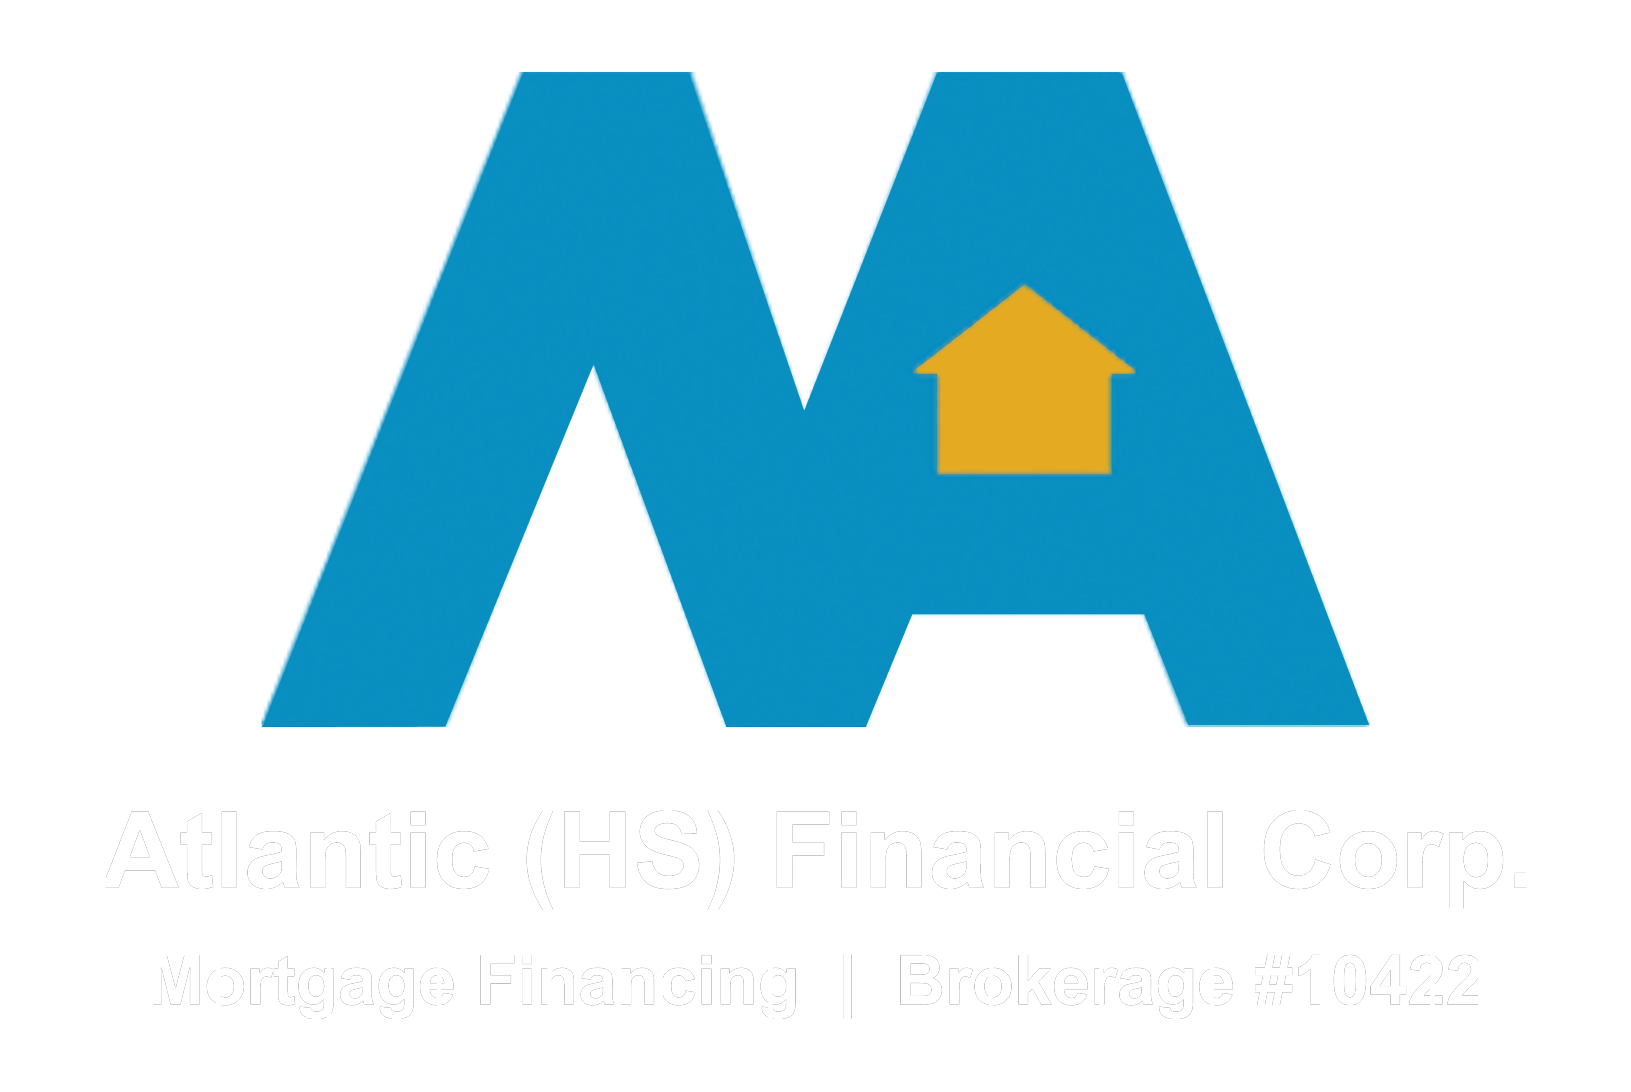 Mortgage Architects Atlantic (HS) Financial Corp.